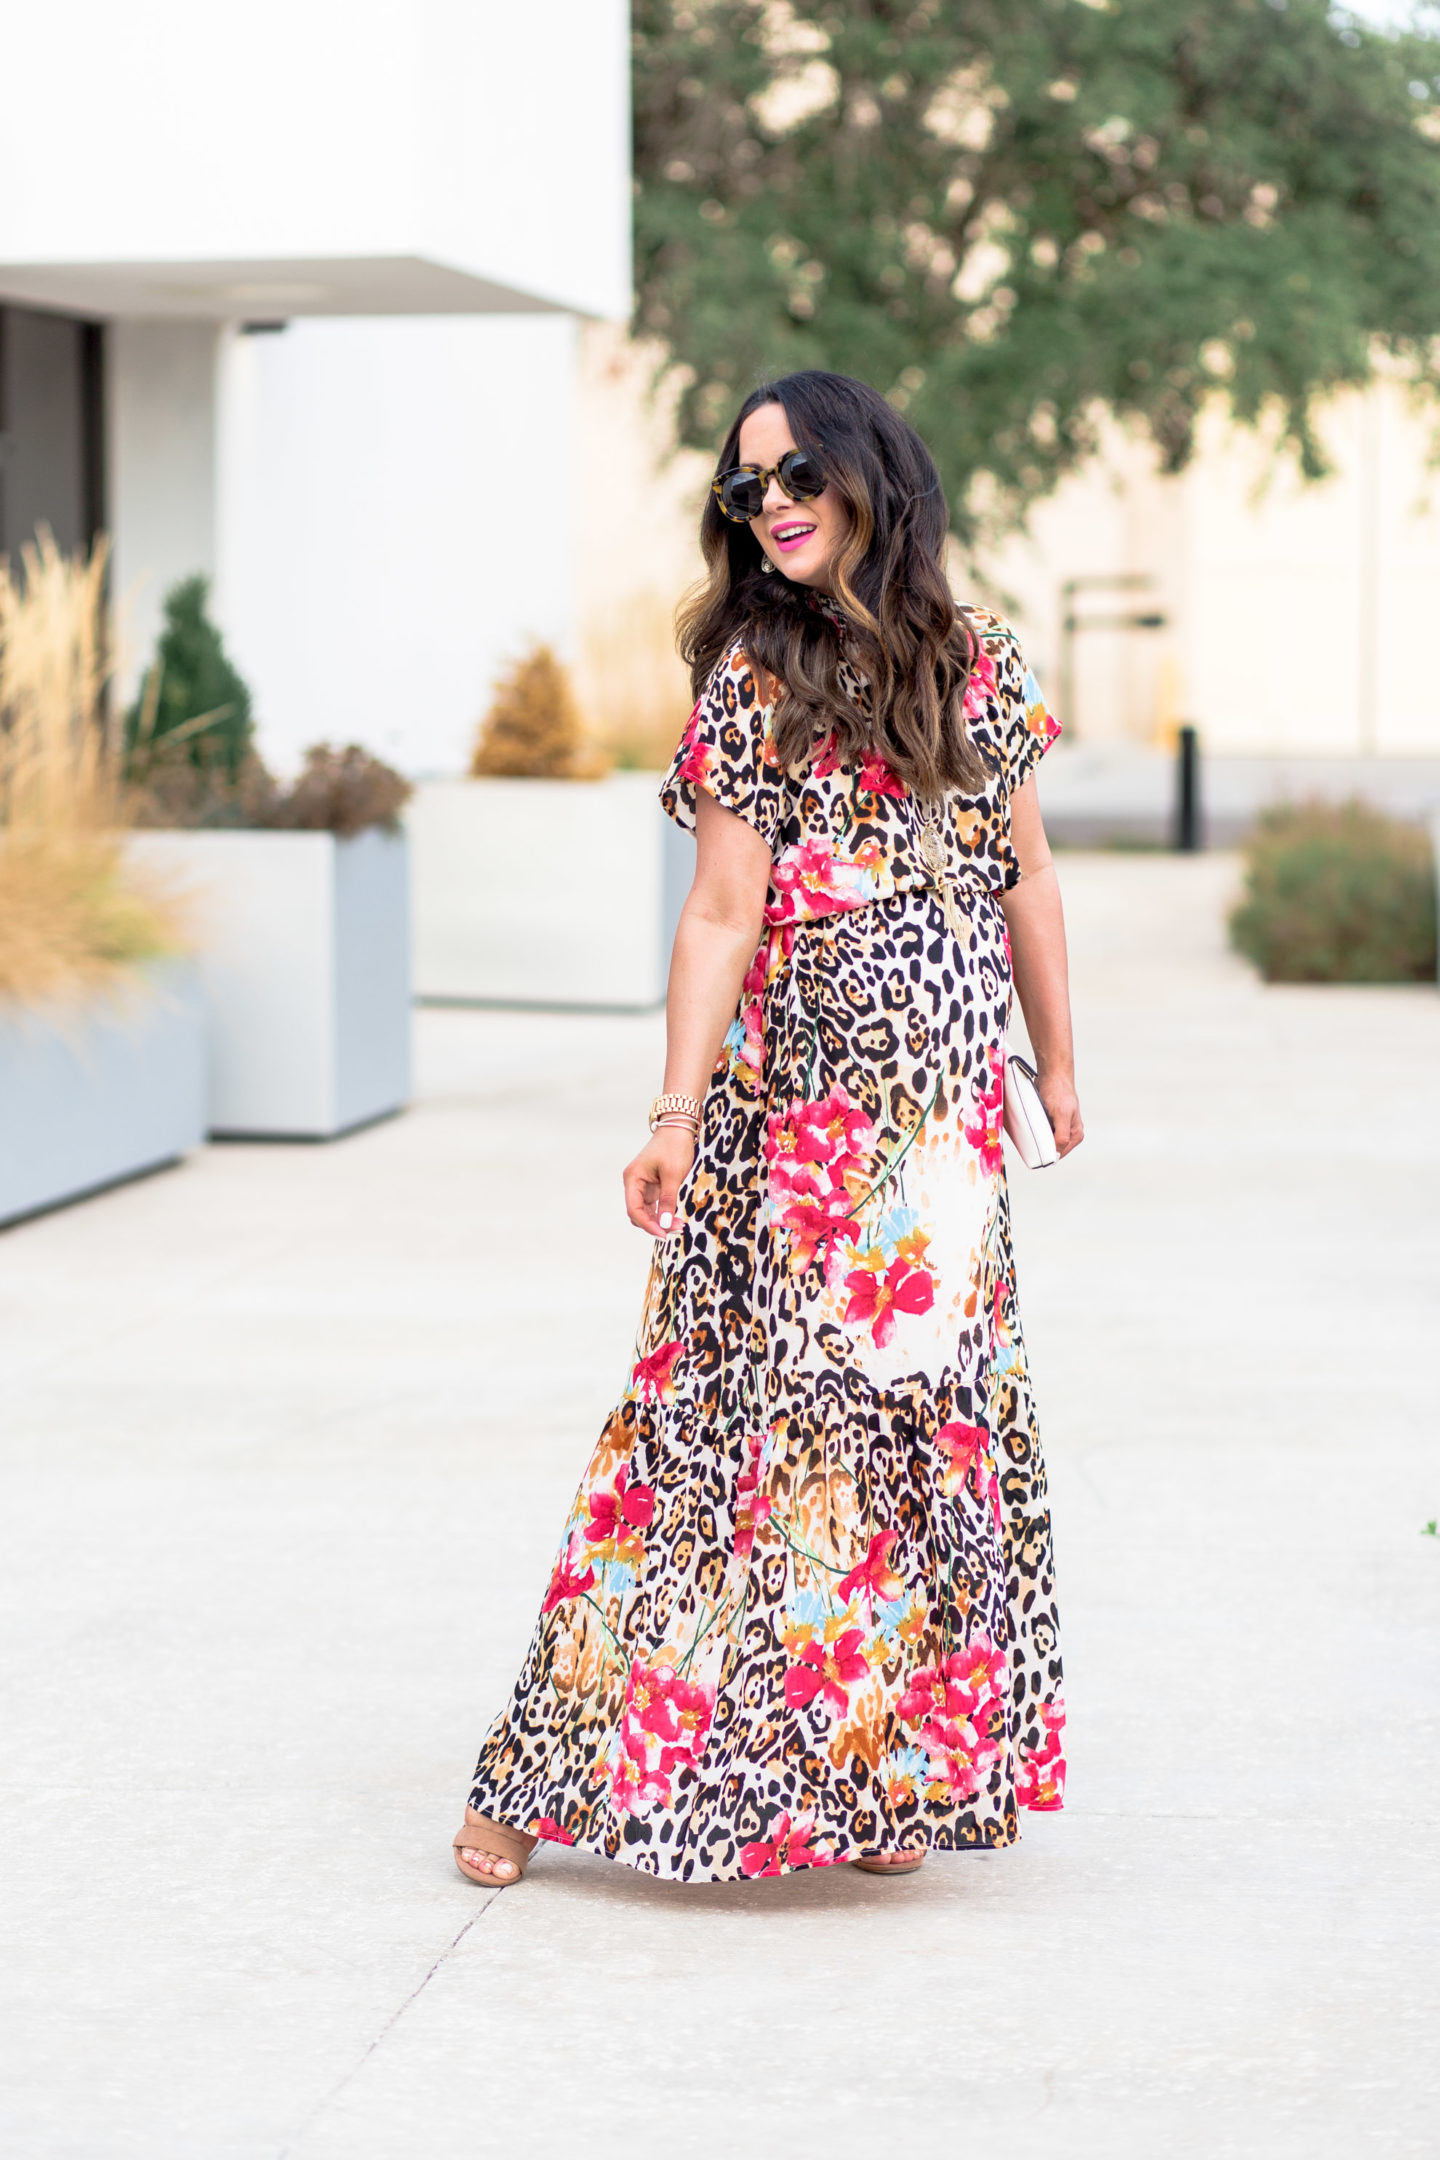 Must-Have Fall Maxi Dresses - The Double Take Girls